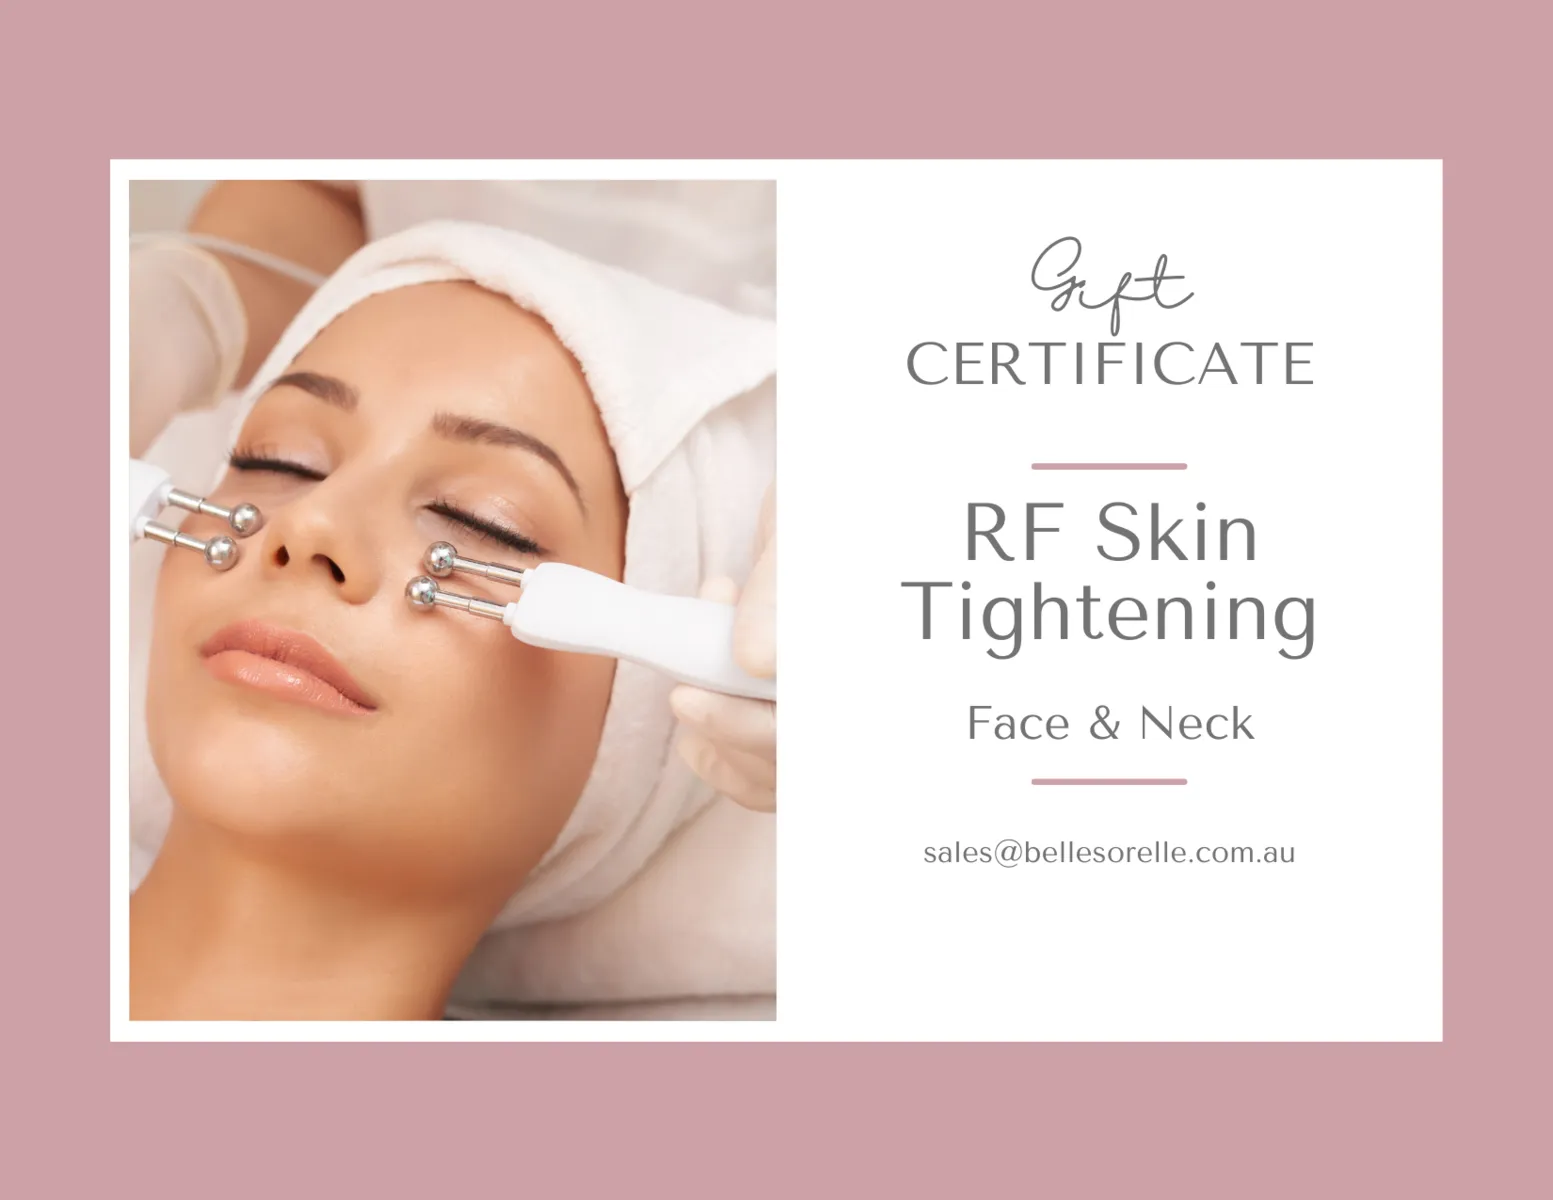 RF Skin Tightening - Face & Neck - Package of three (save 20%)